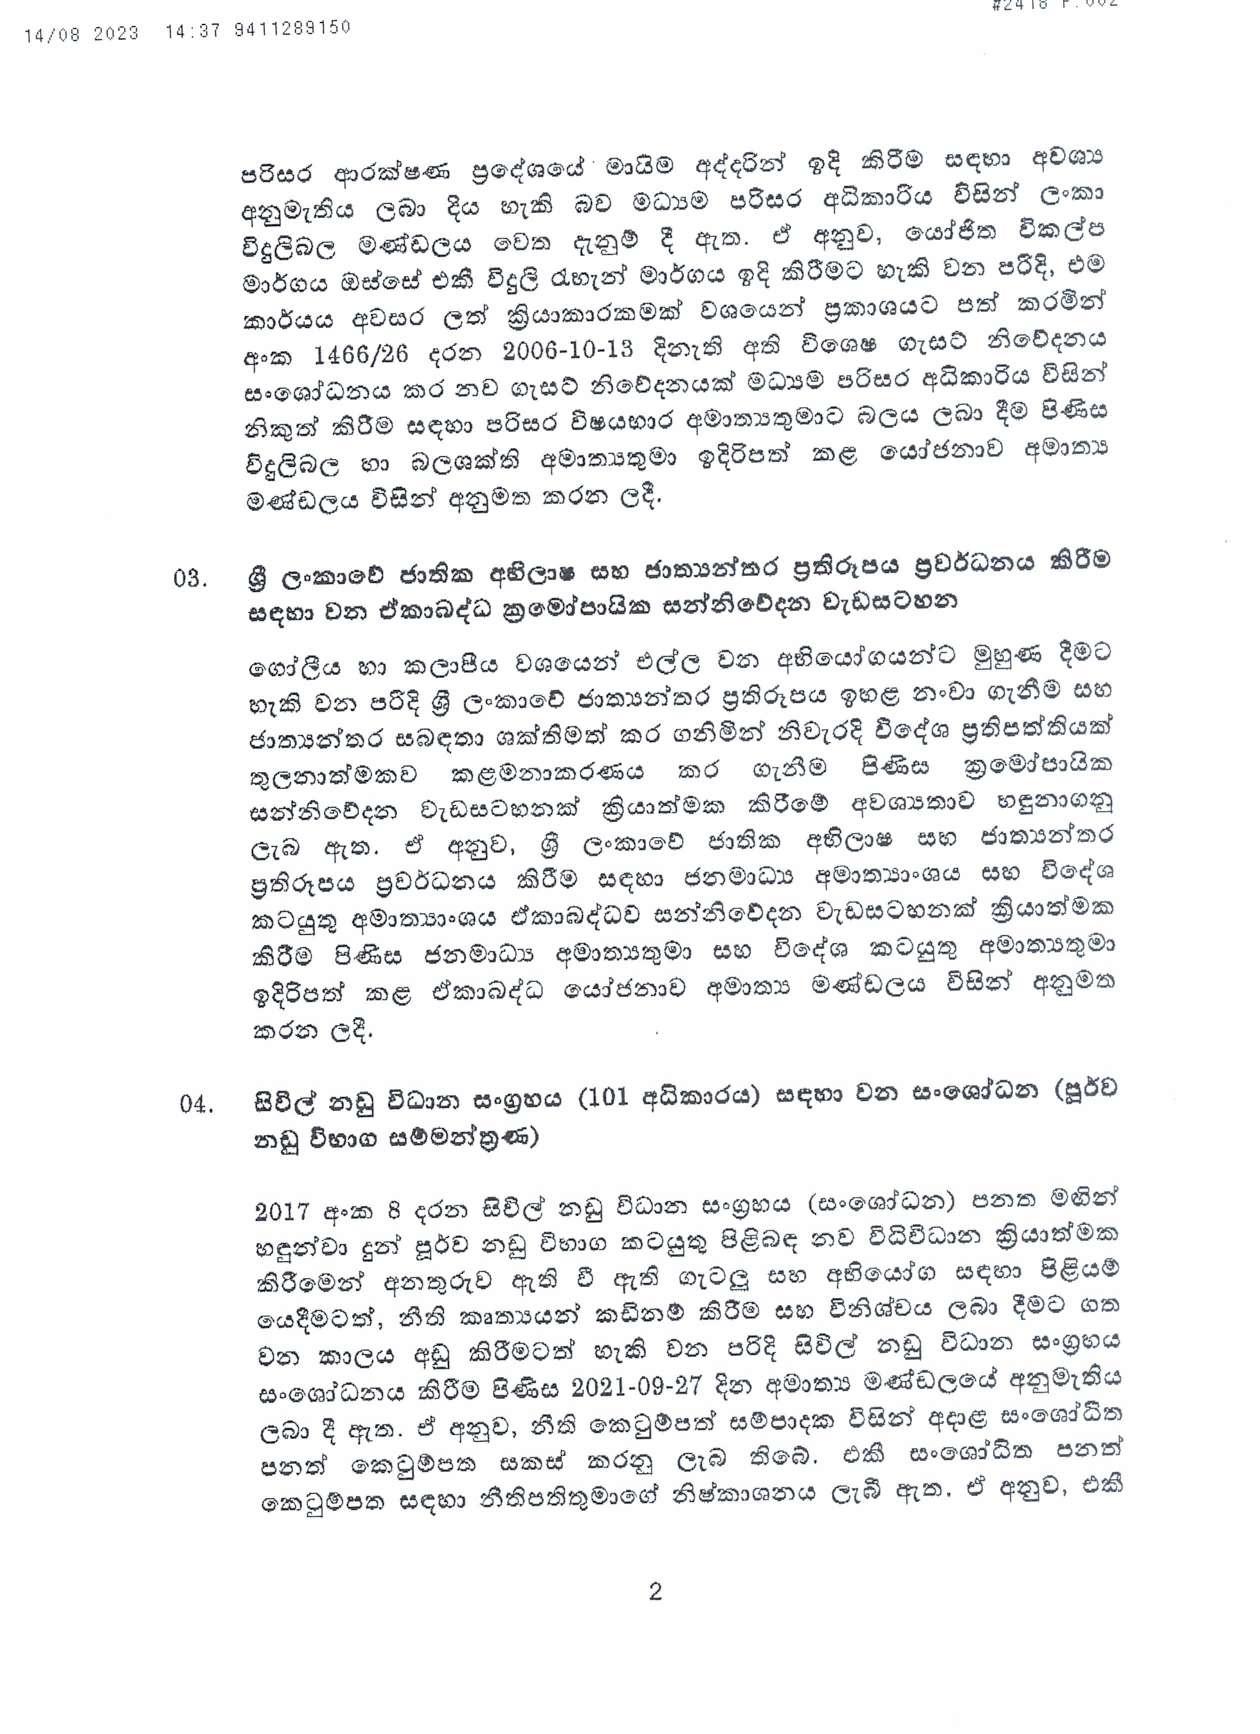 Cabinet Decision on 14.08.2023 1 page 002